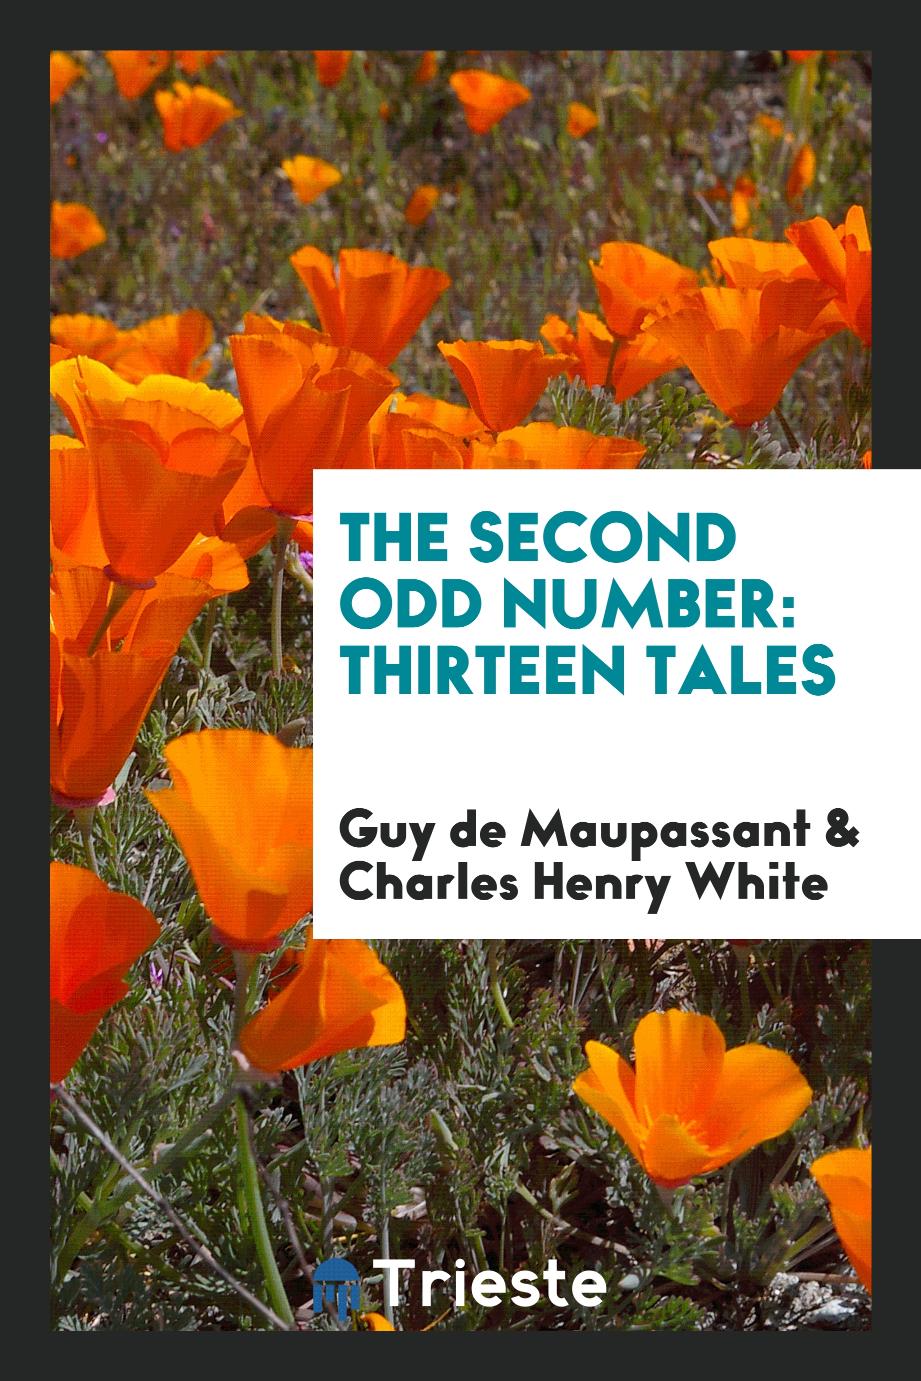 The second odd number: thirteen tales